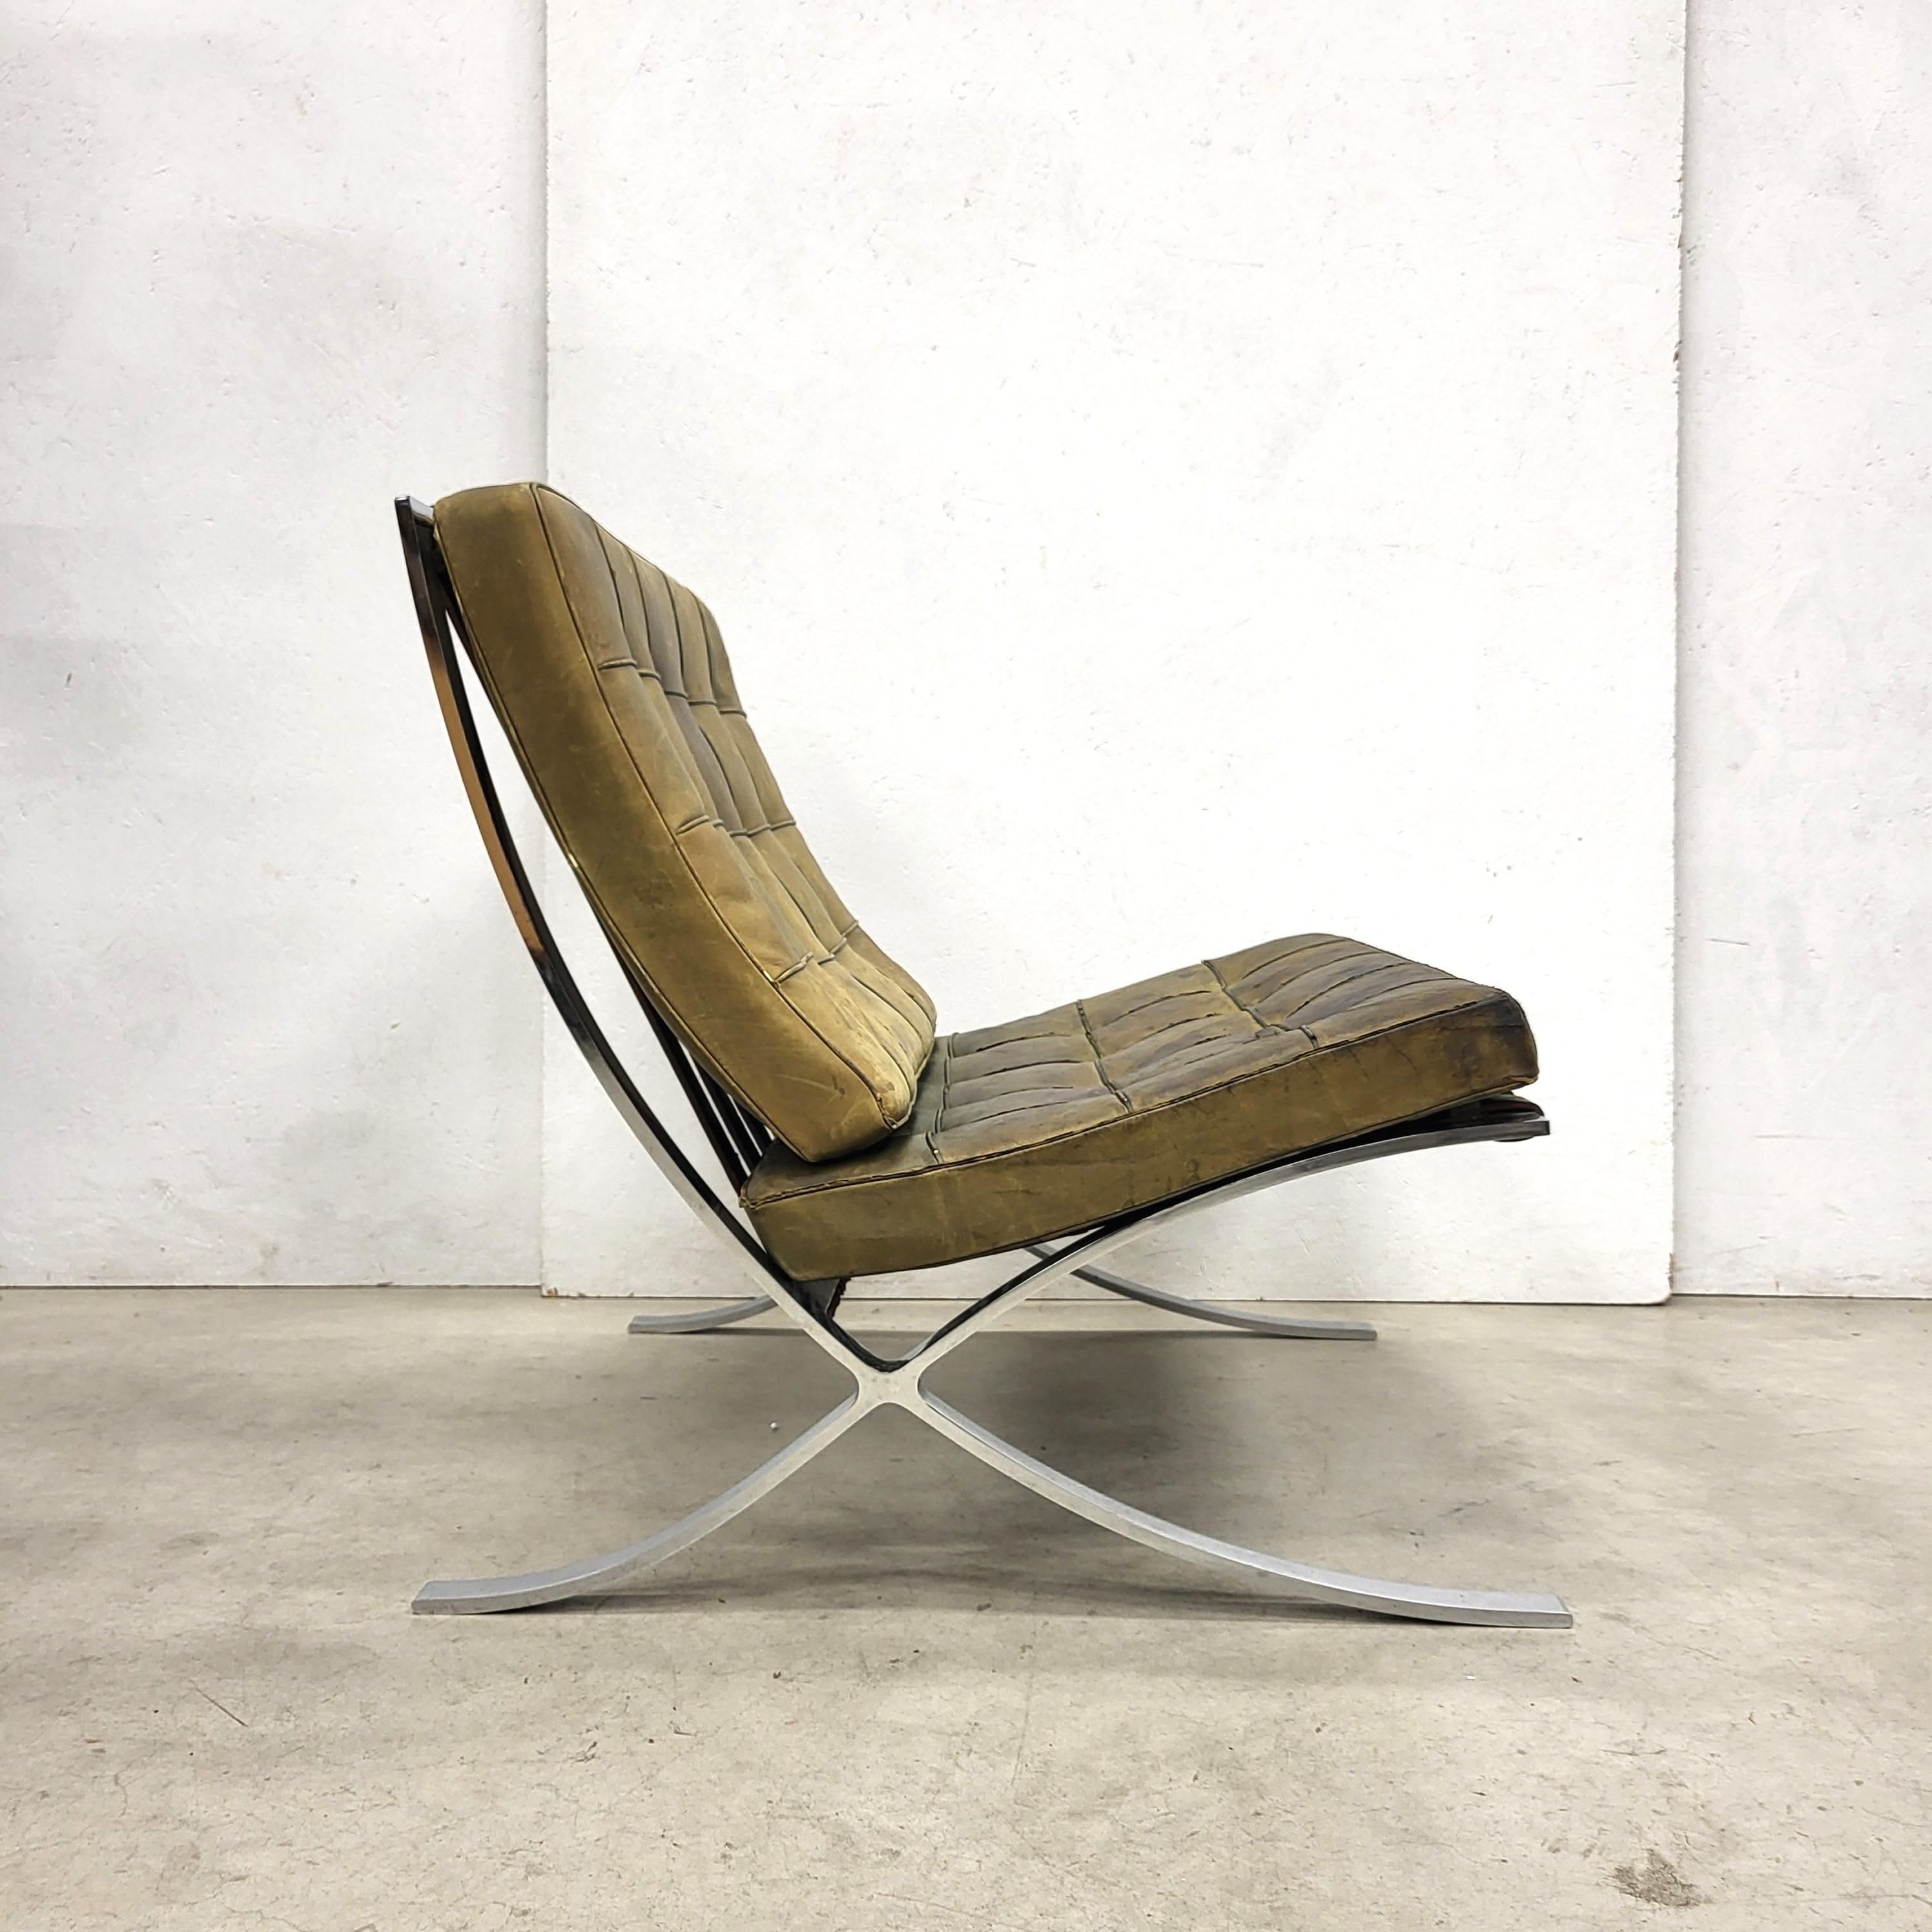 This rare Barcelona chair was designed by Mies van der Rohe in 1929 and produced by Knoll International in the 1970s. 

The piece features an amazing hand dyed olive green leather upholstery with on a chromed steel base. 

The Barcelona chair is in